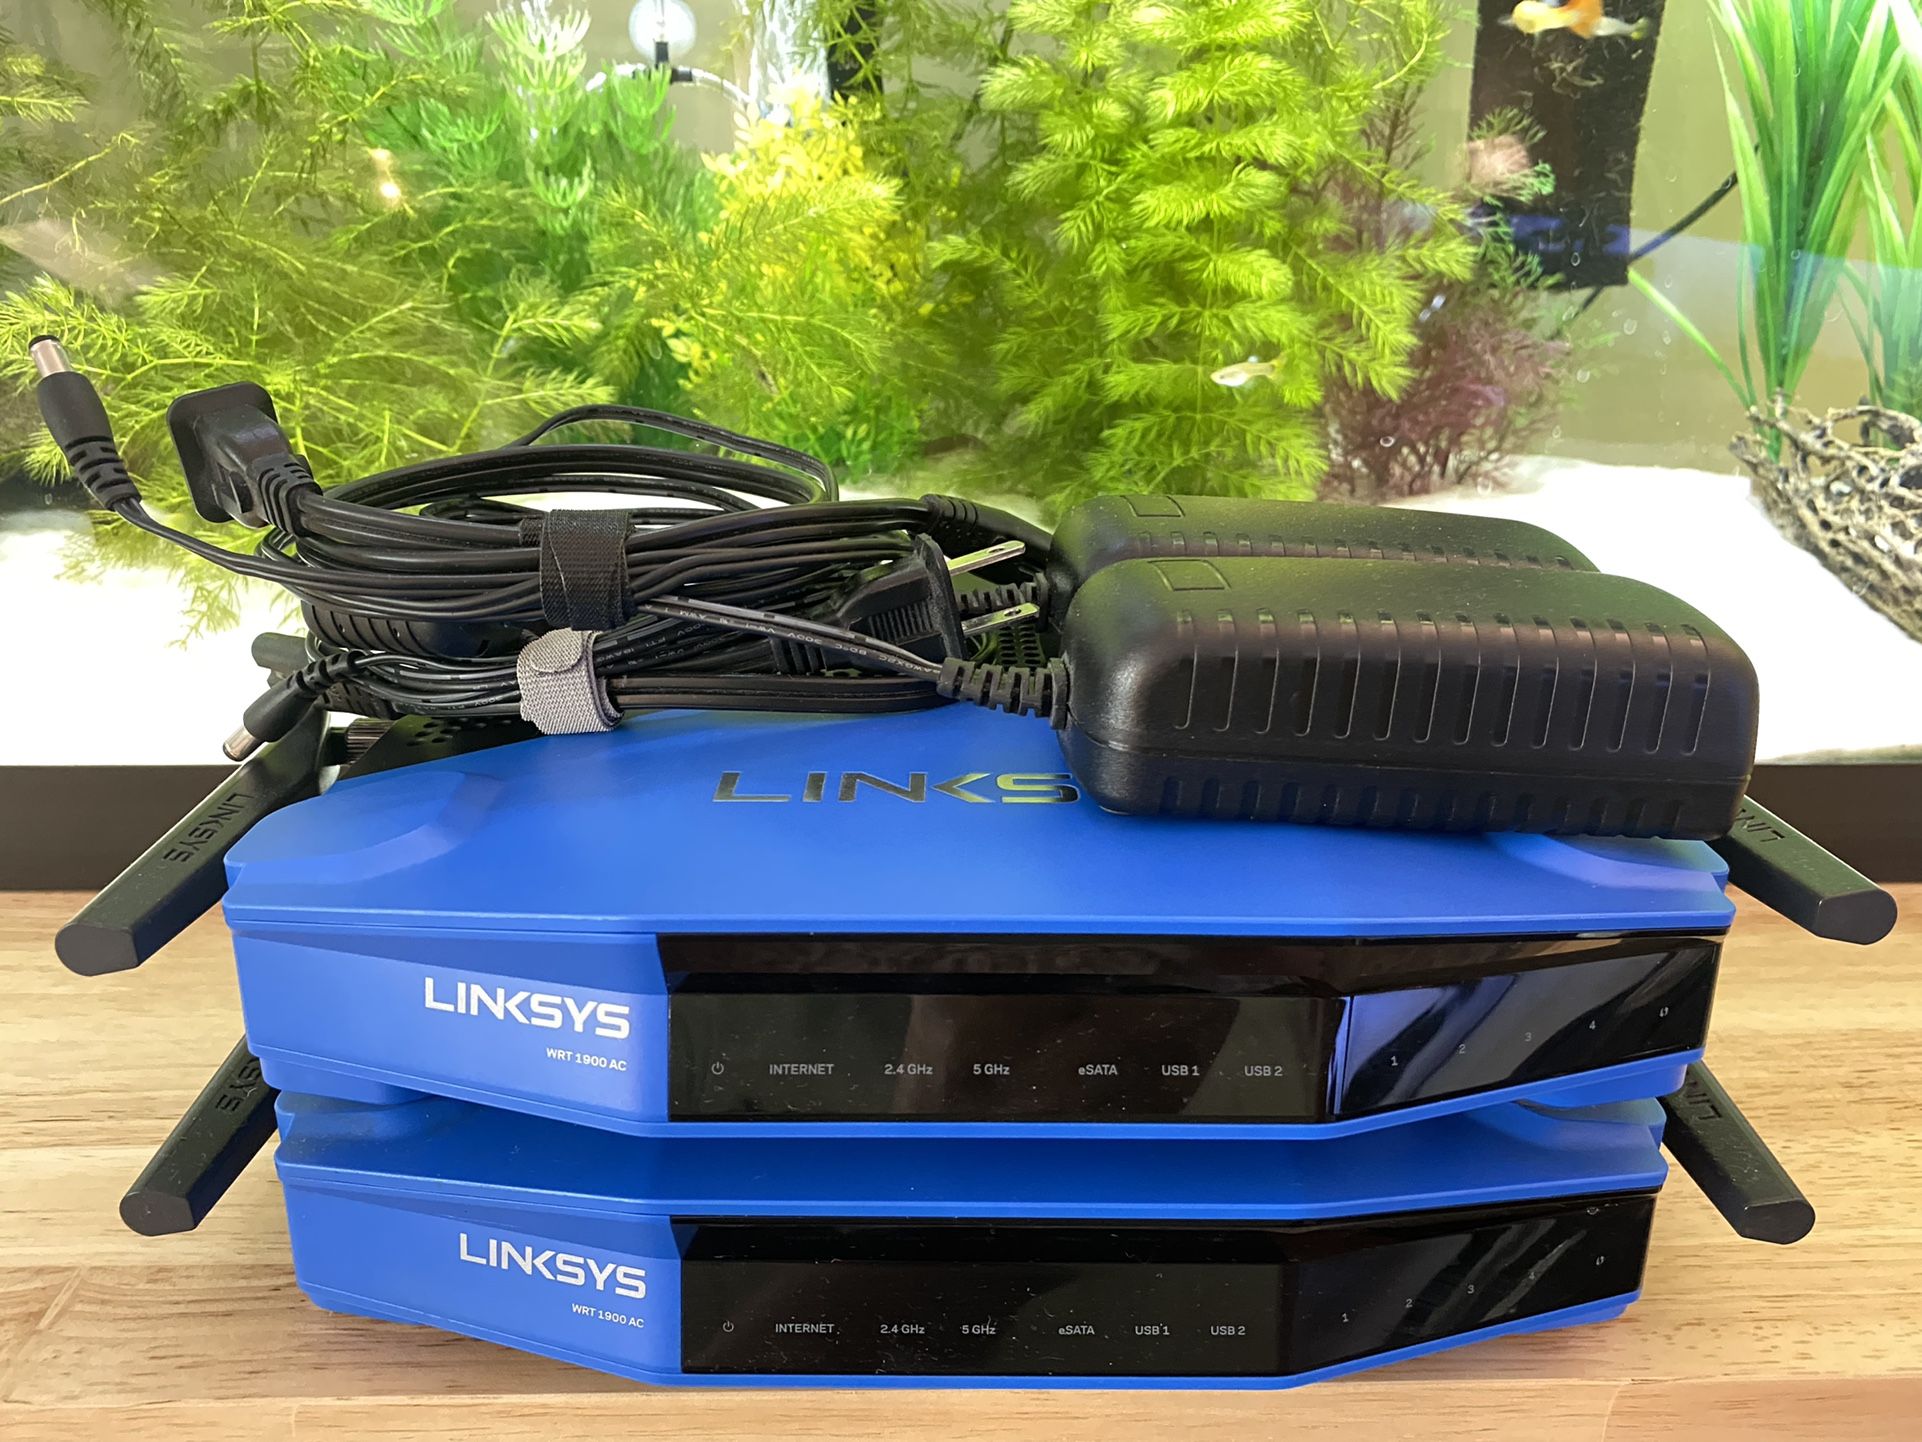 Two Linksys WRT 1900AC Routers